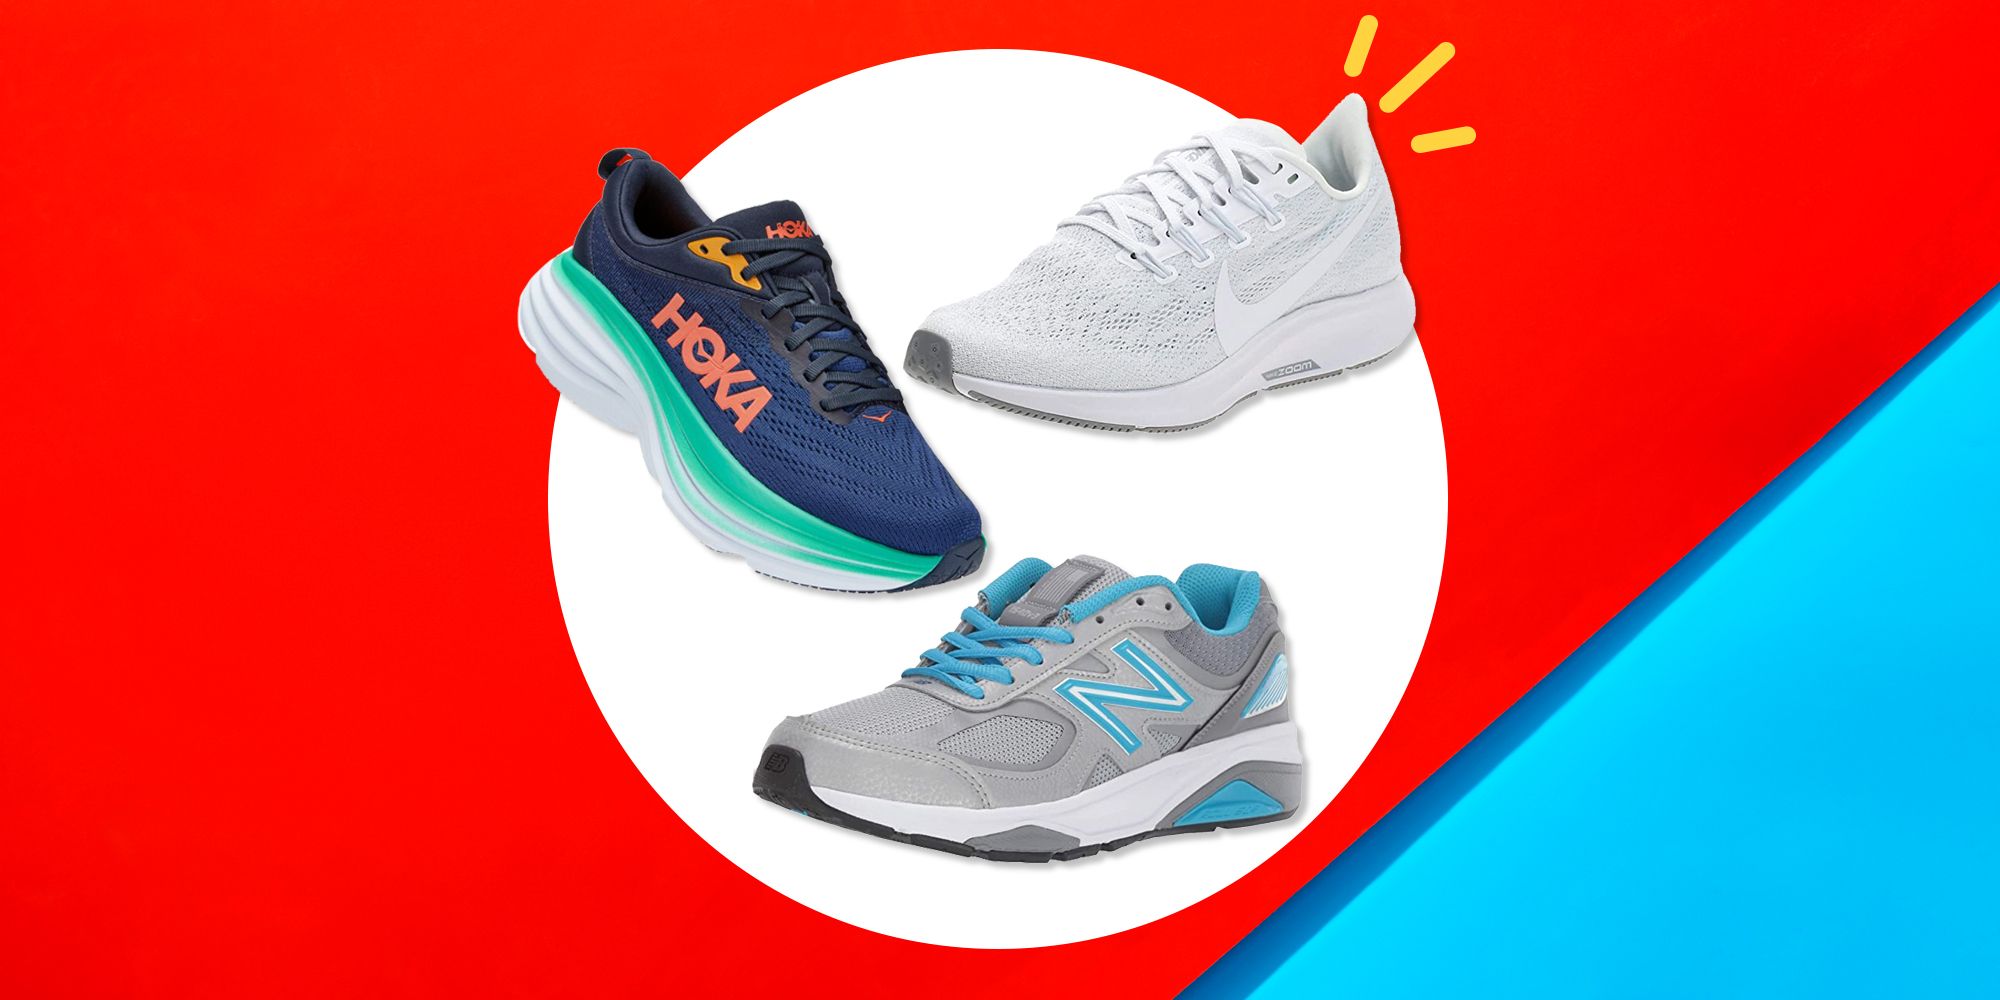 10 Best Walking Shoes for Women: Comfortable Options to Suit Your